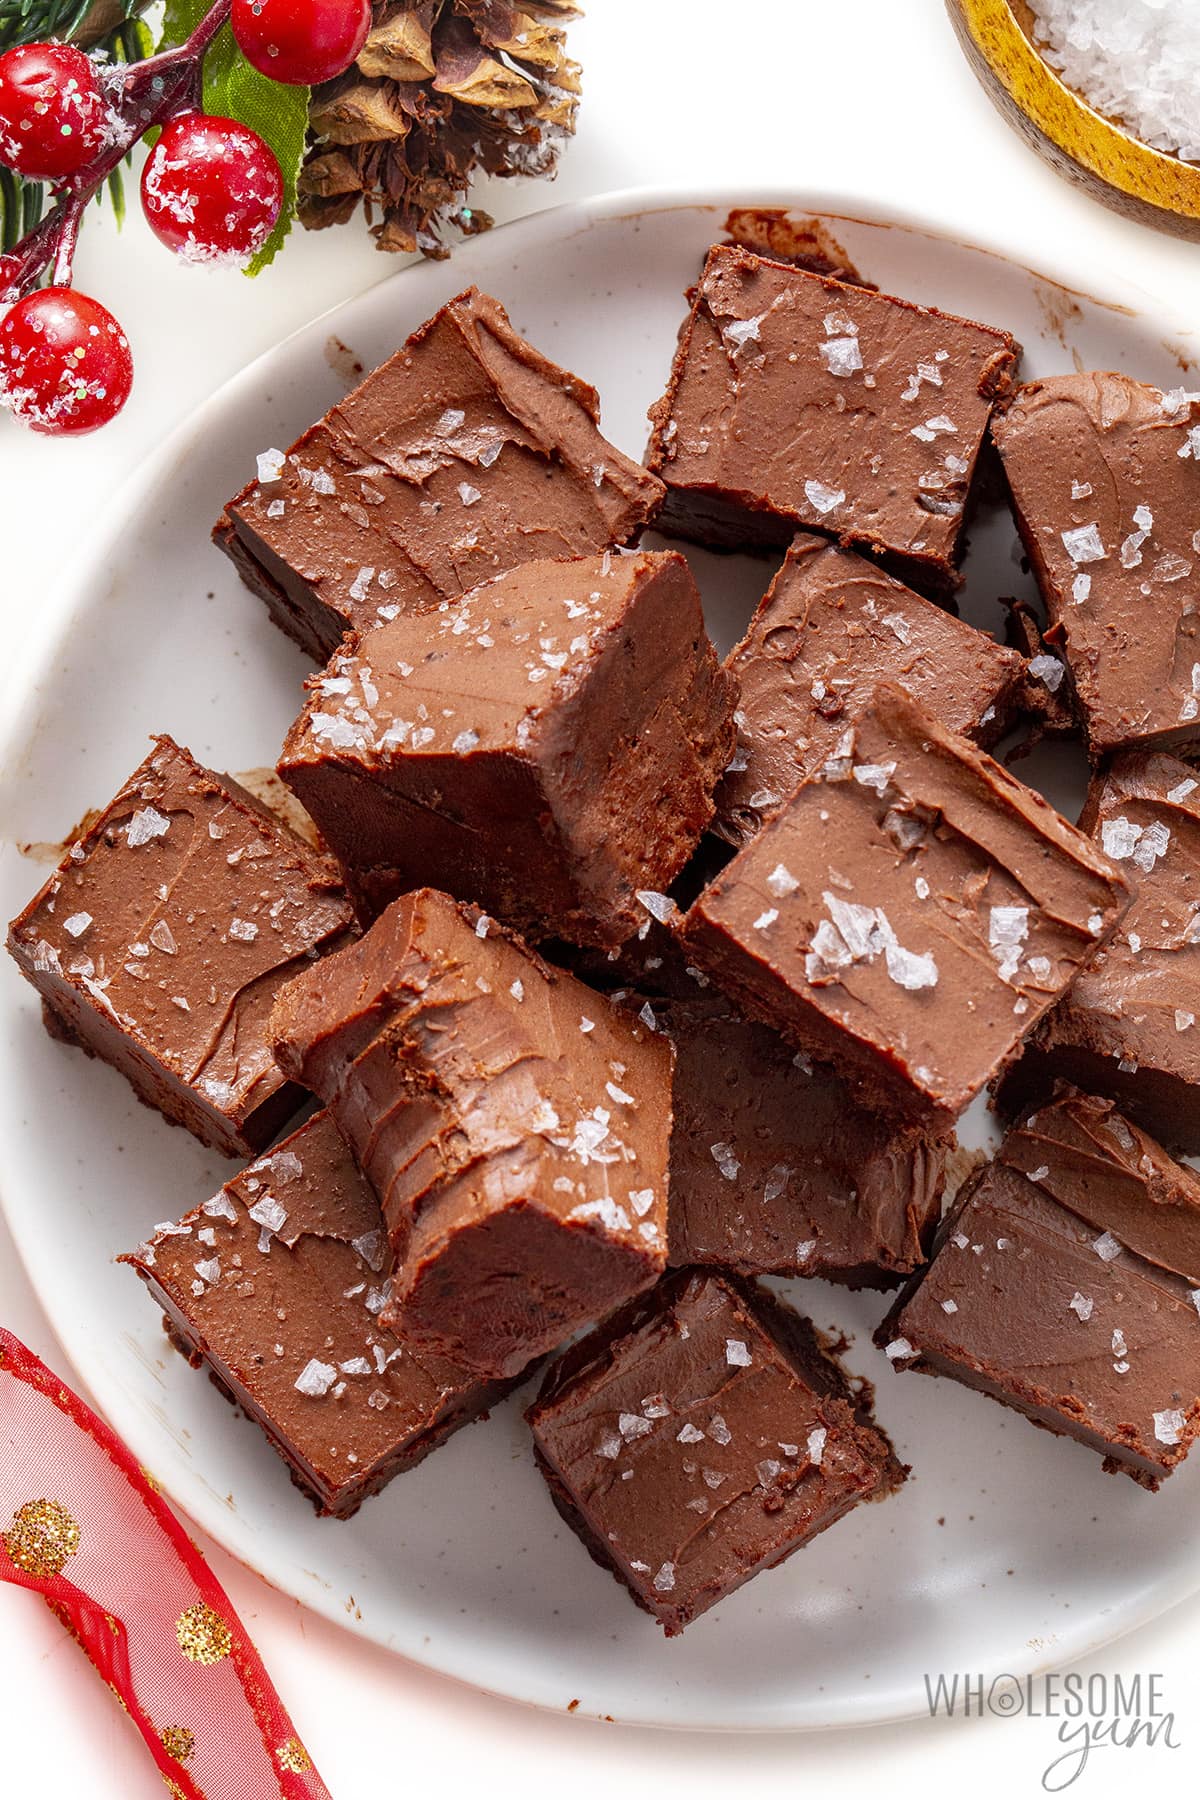 Cubes of sugar-free fudge are piled on the plate, one of which has been bitten off.